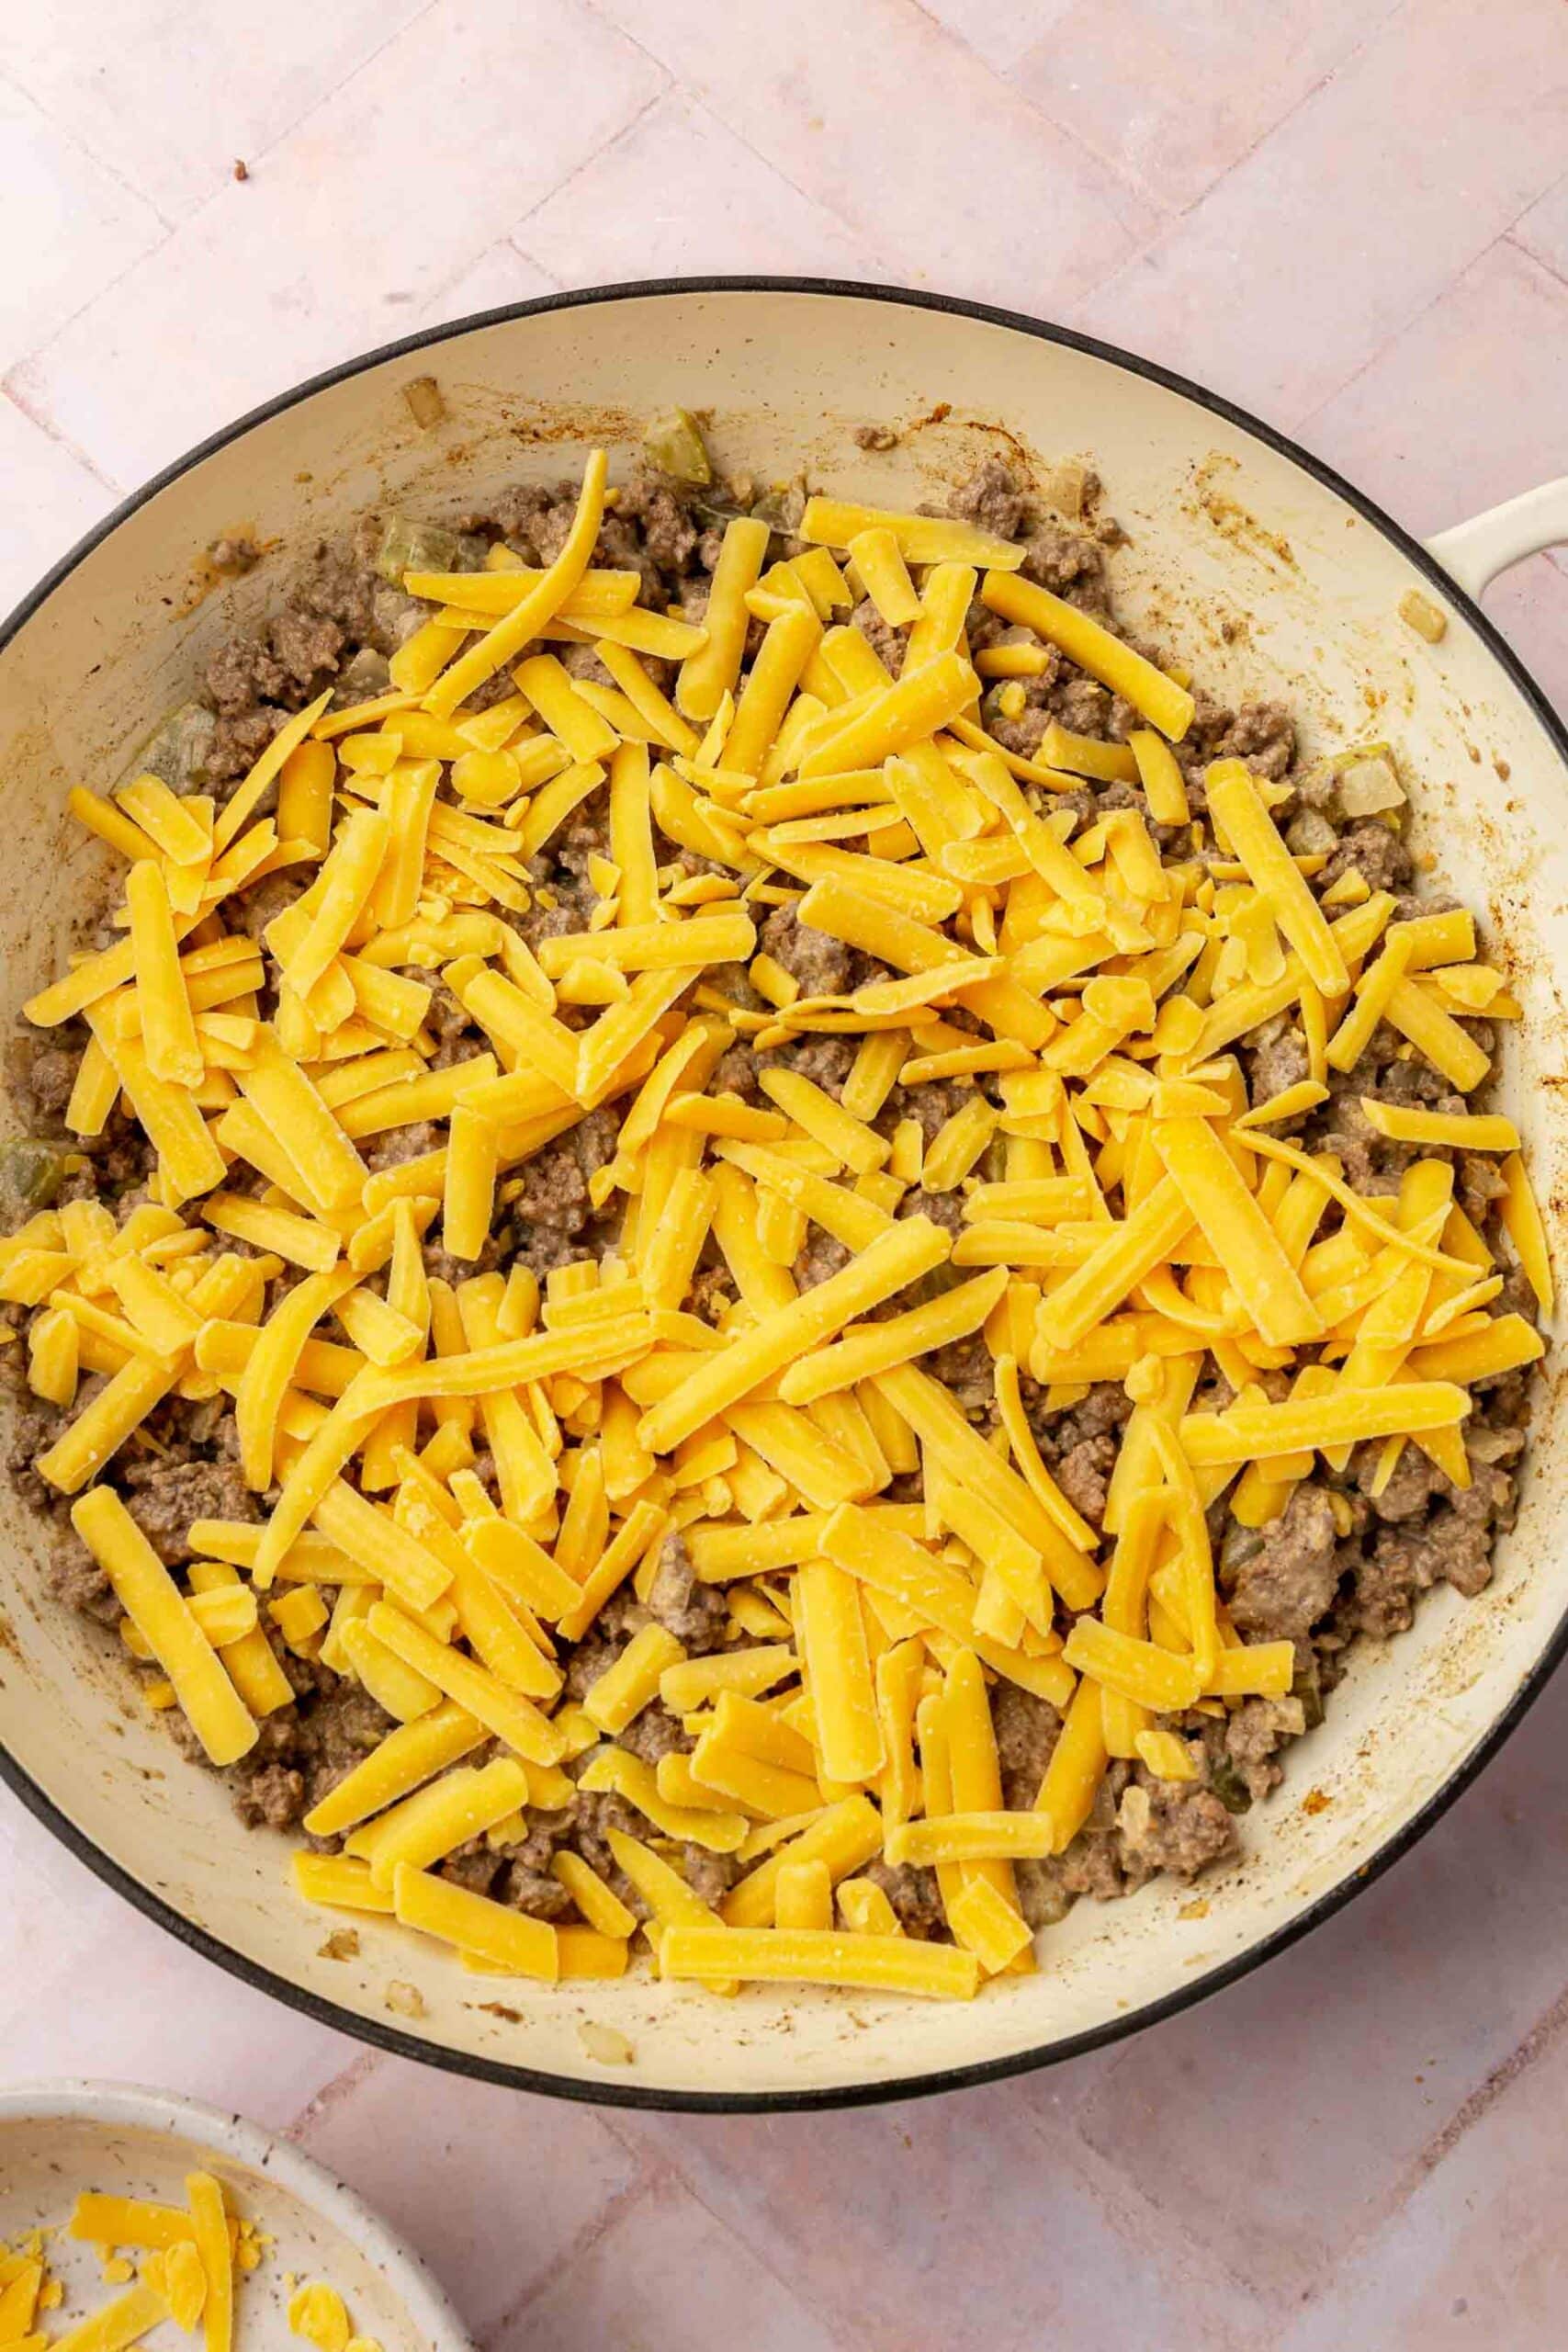 A braising pan with a ground beef mixture topped with shredded cheddar cheese before baking in the oven.